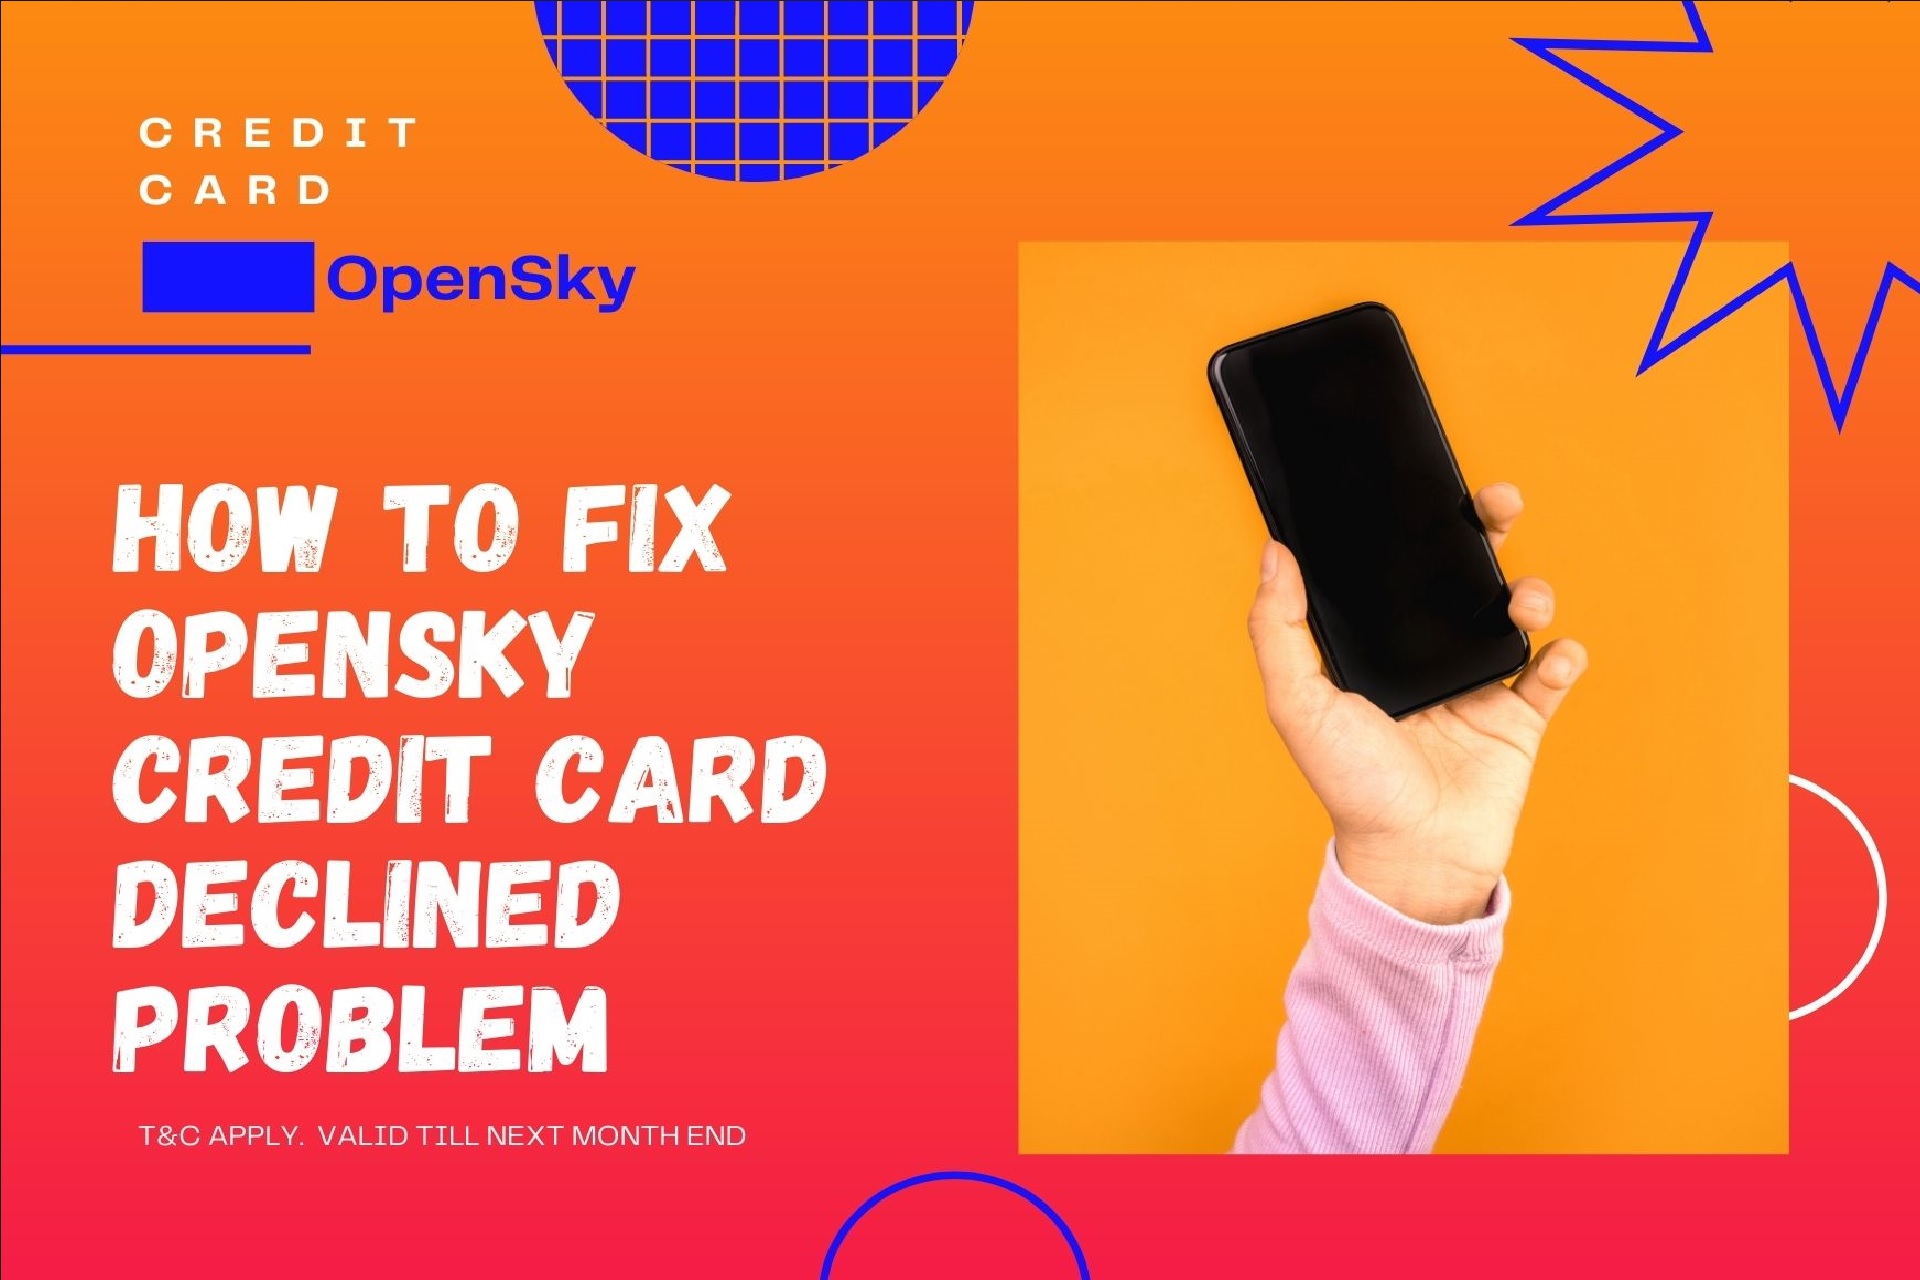 How to Fix OpenSky Credit Card Declined Problem?